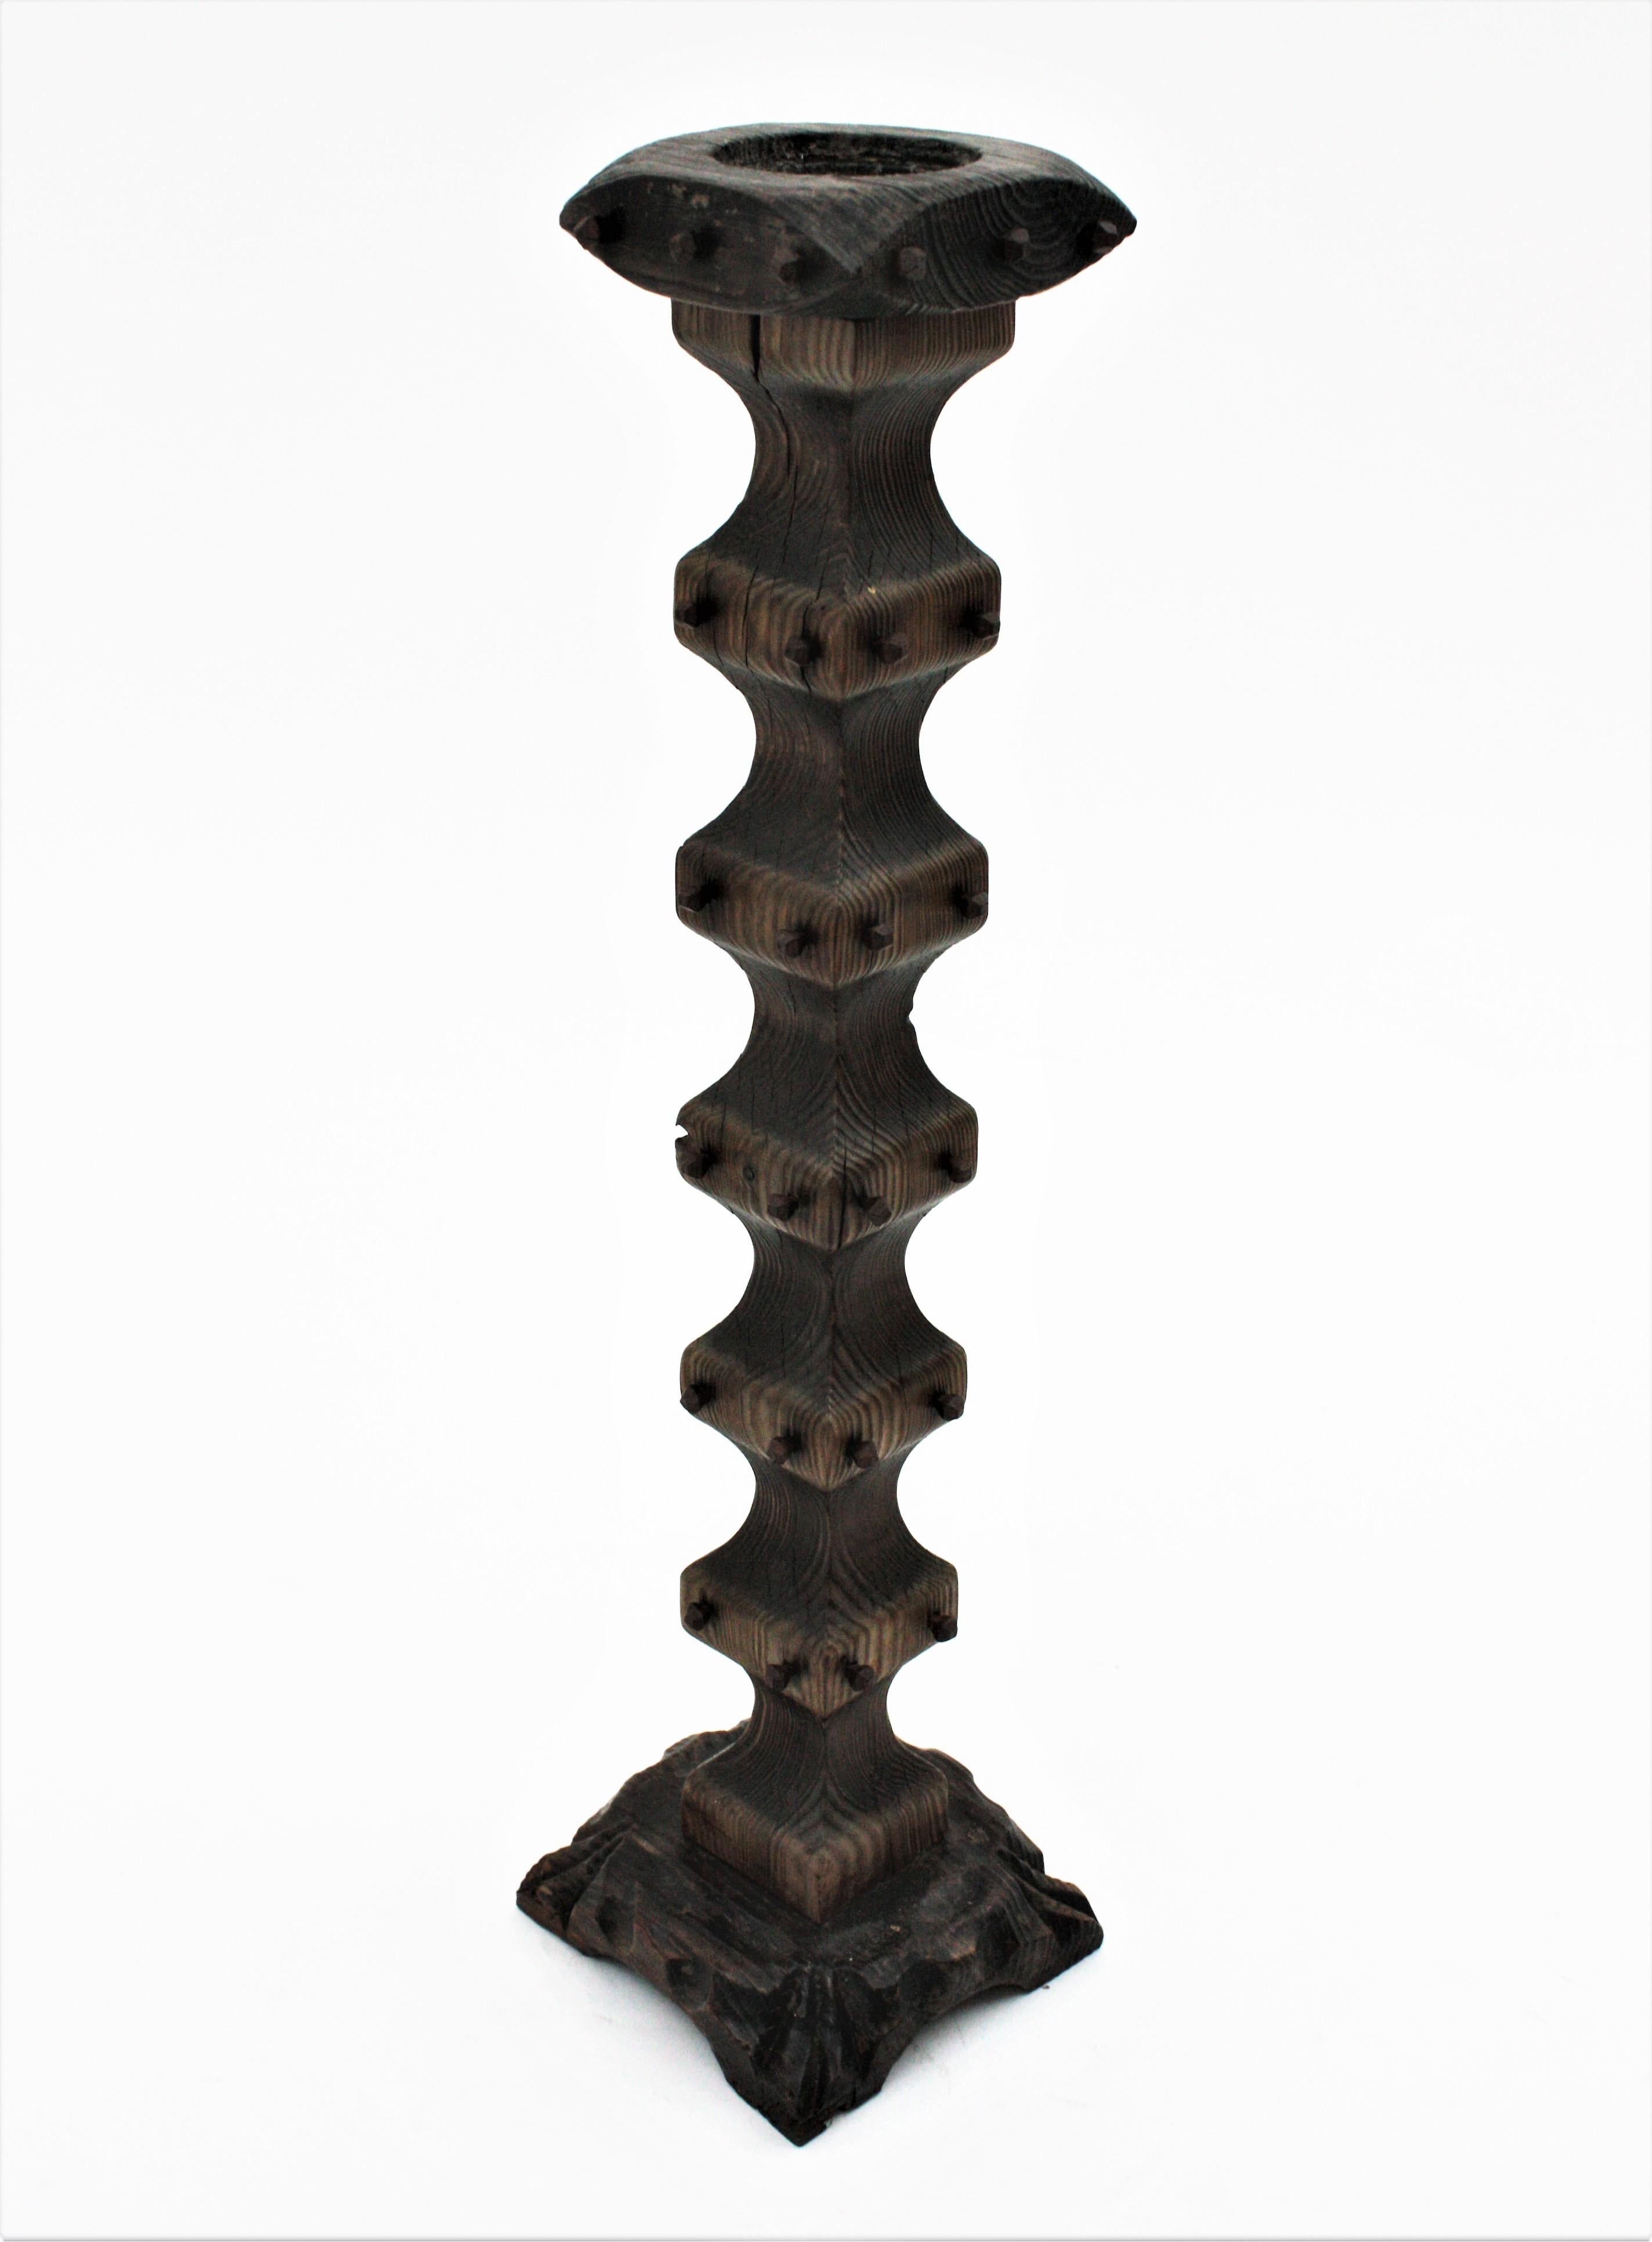 Floor standing candle holder in turned wood and iron nails, Spain, 1940s.
Eye-catching floor candle holder in pine wood. It has squared shape, scalloped turned design and wrought iron nails decorative details 
Terrific aged patina.
This piece has a